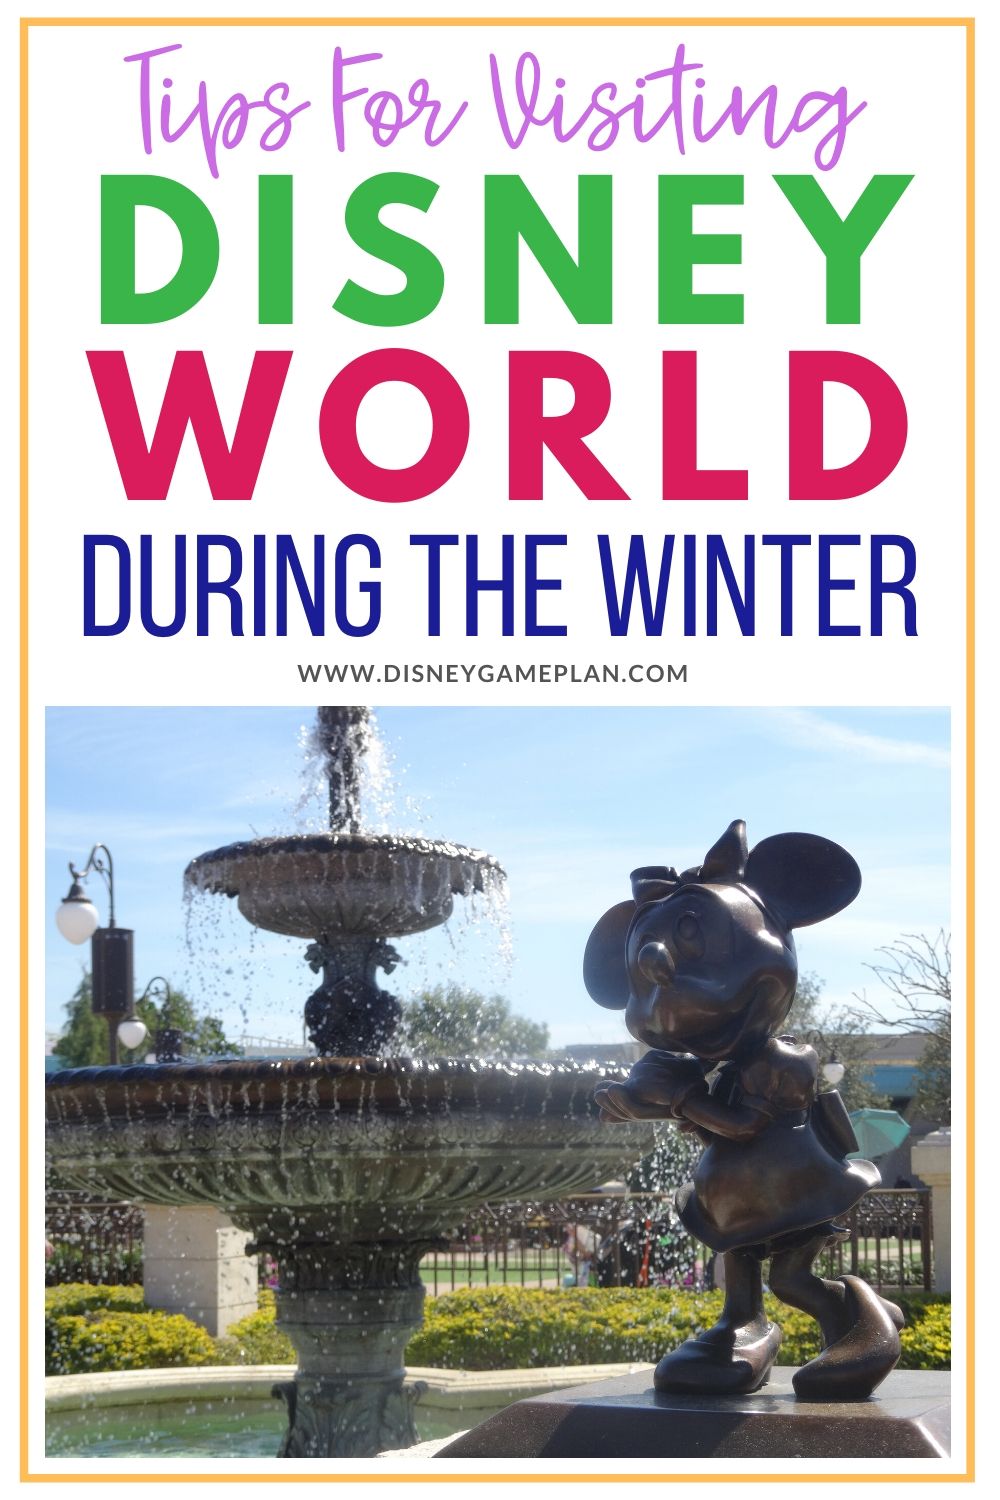 Visiting Walt Disney World in the offseason requires different strategies.  Here are some pointers on how to plan for a successful winter Disney World trip. #disneyworldwinter #disneyworld #disneytips